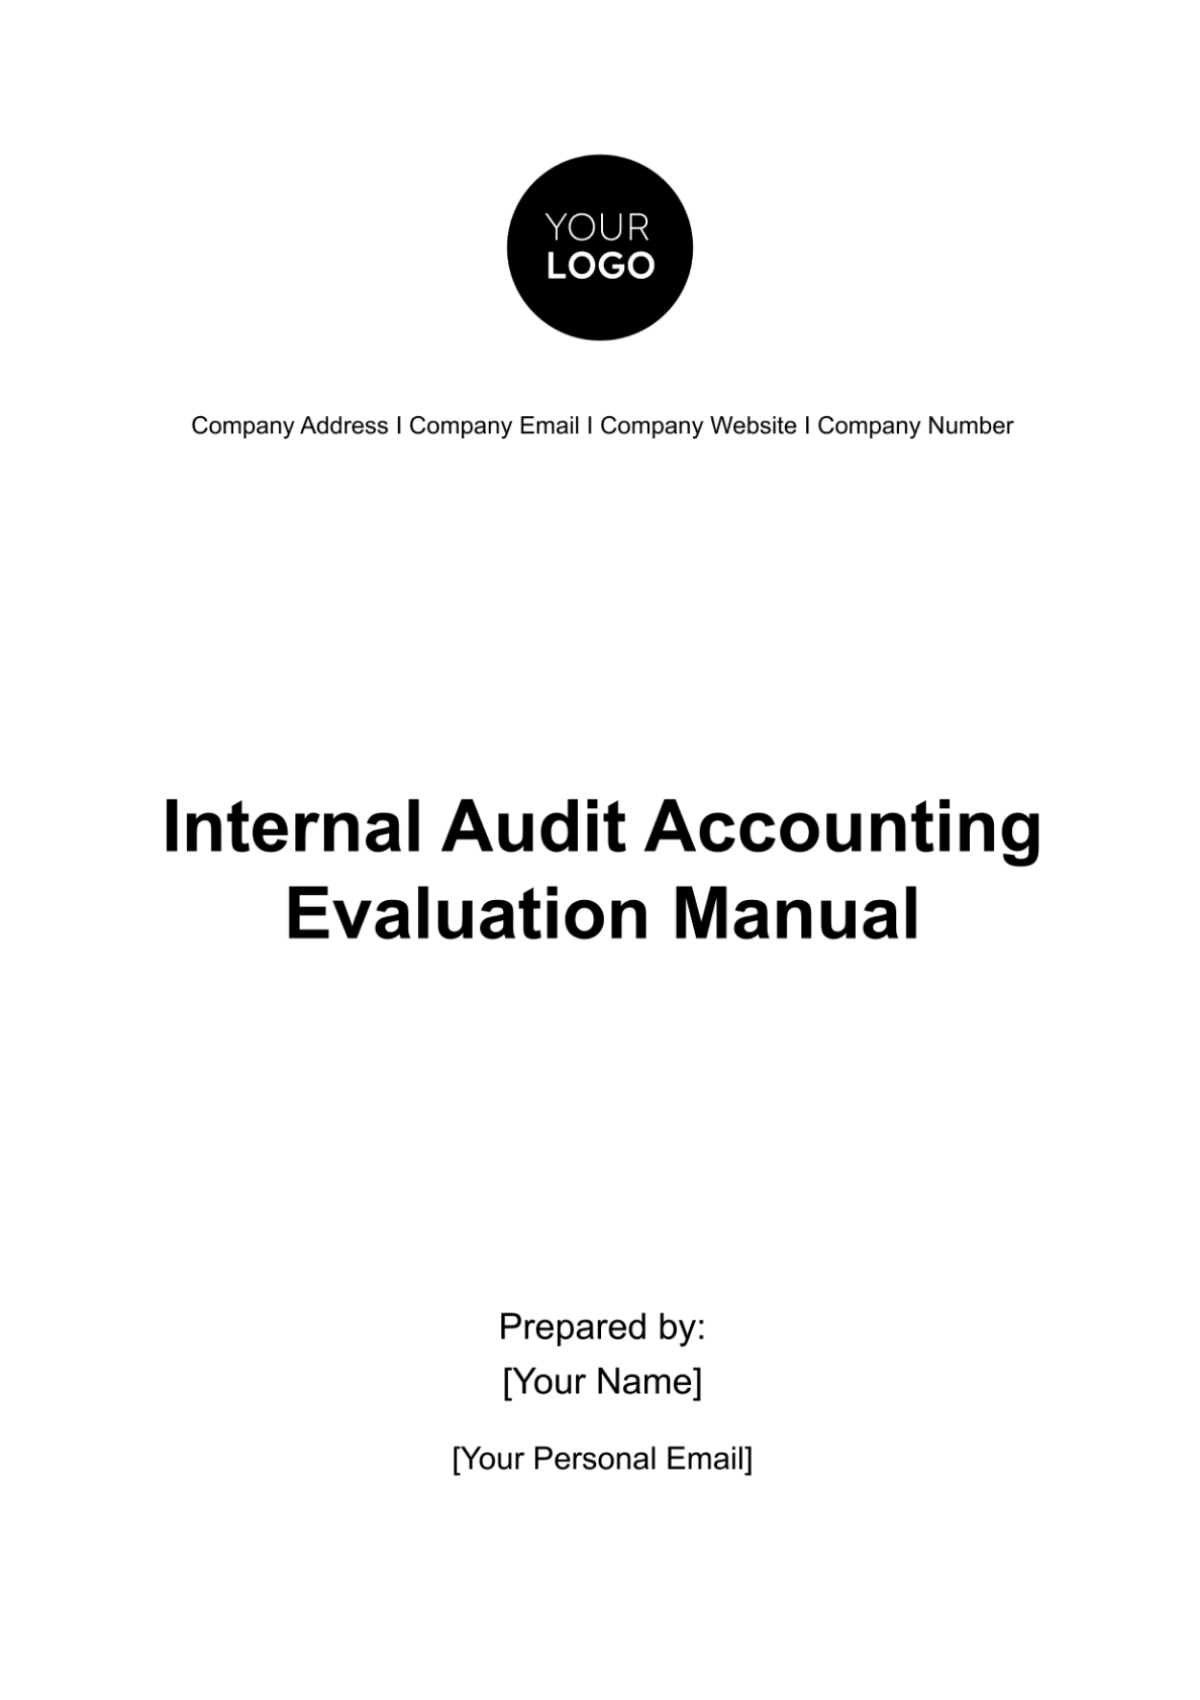 Free Internal Audit Accounting Evaluation Manual Template